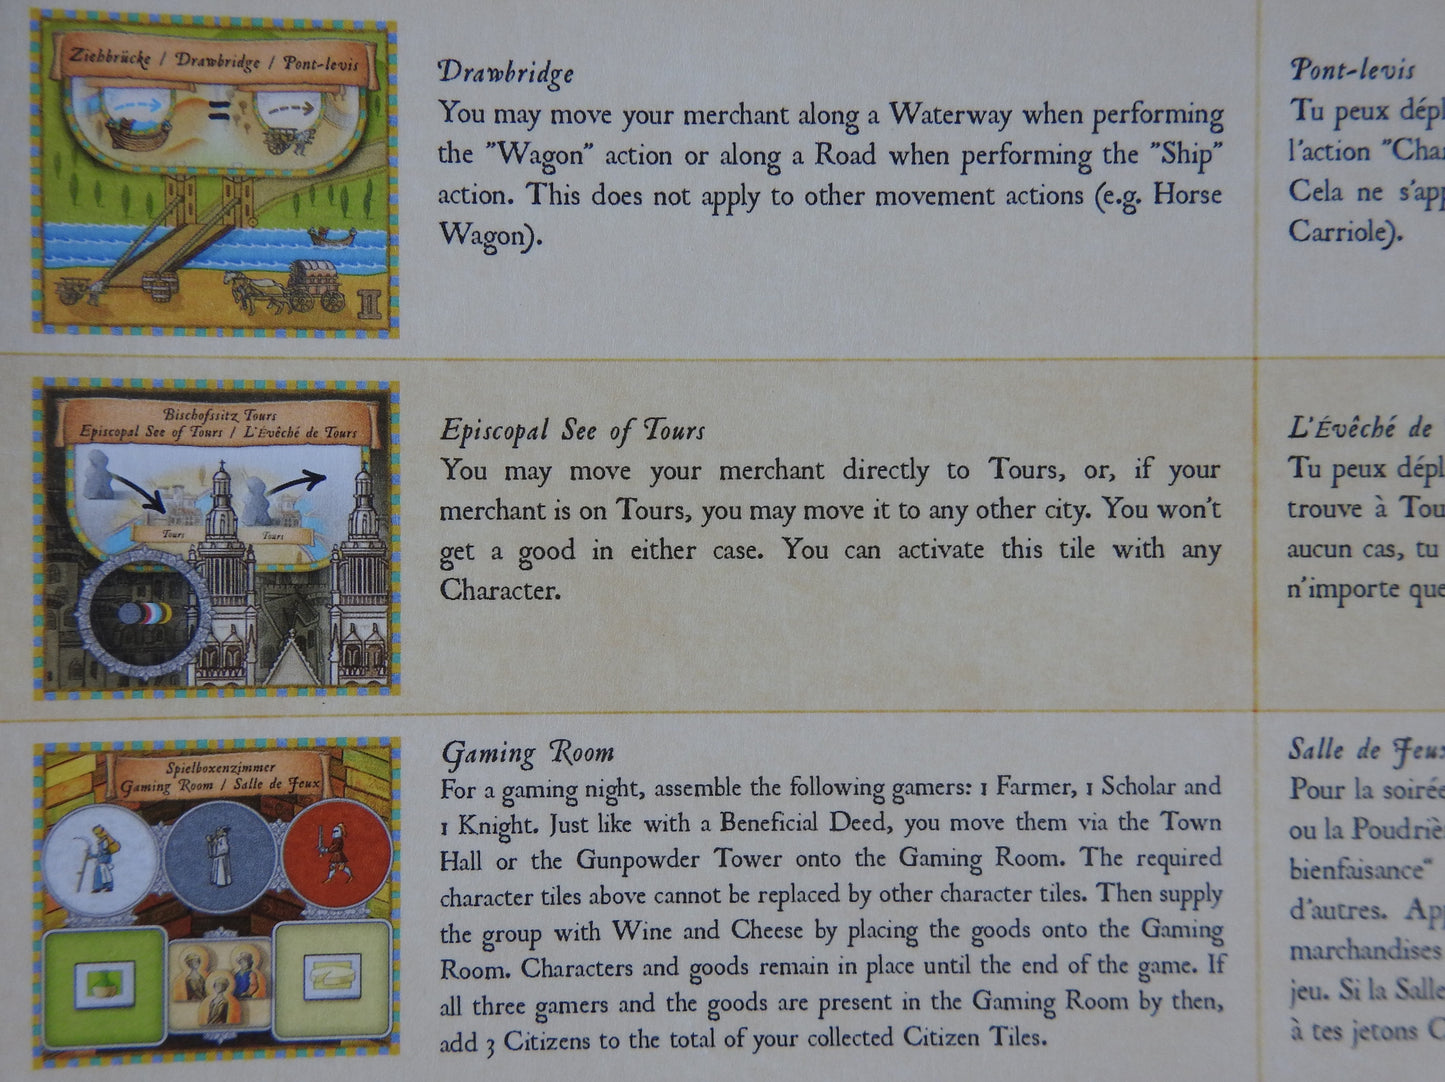 Close-up of the English rules on the card that is included.